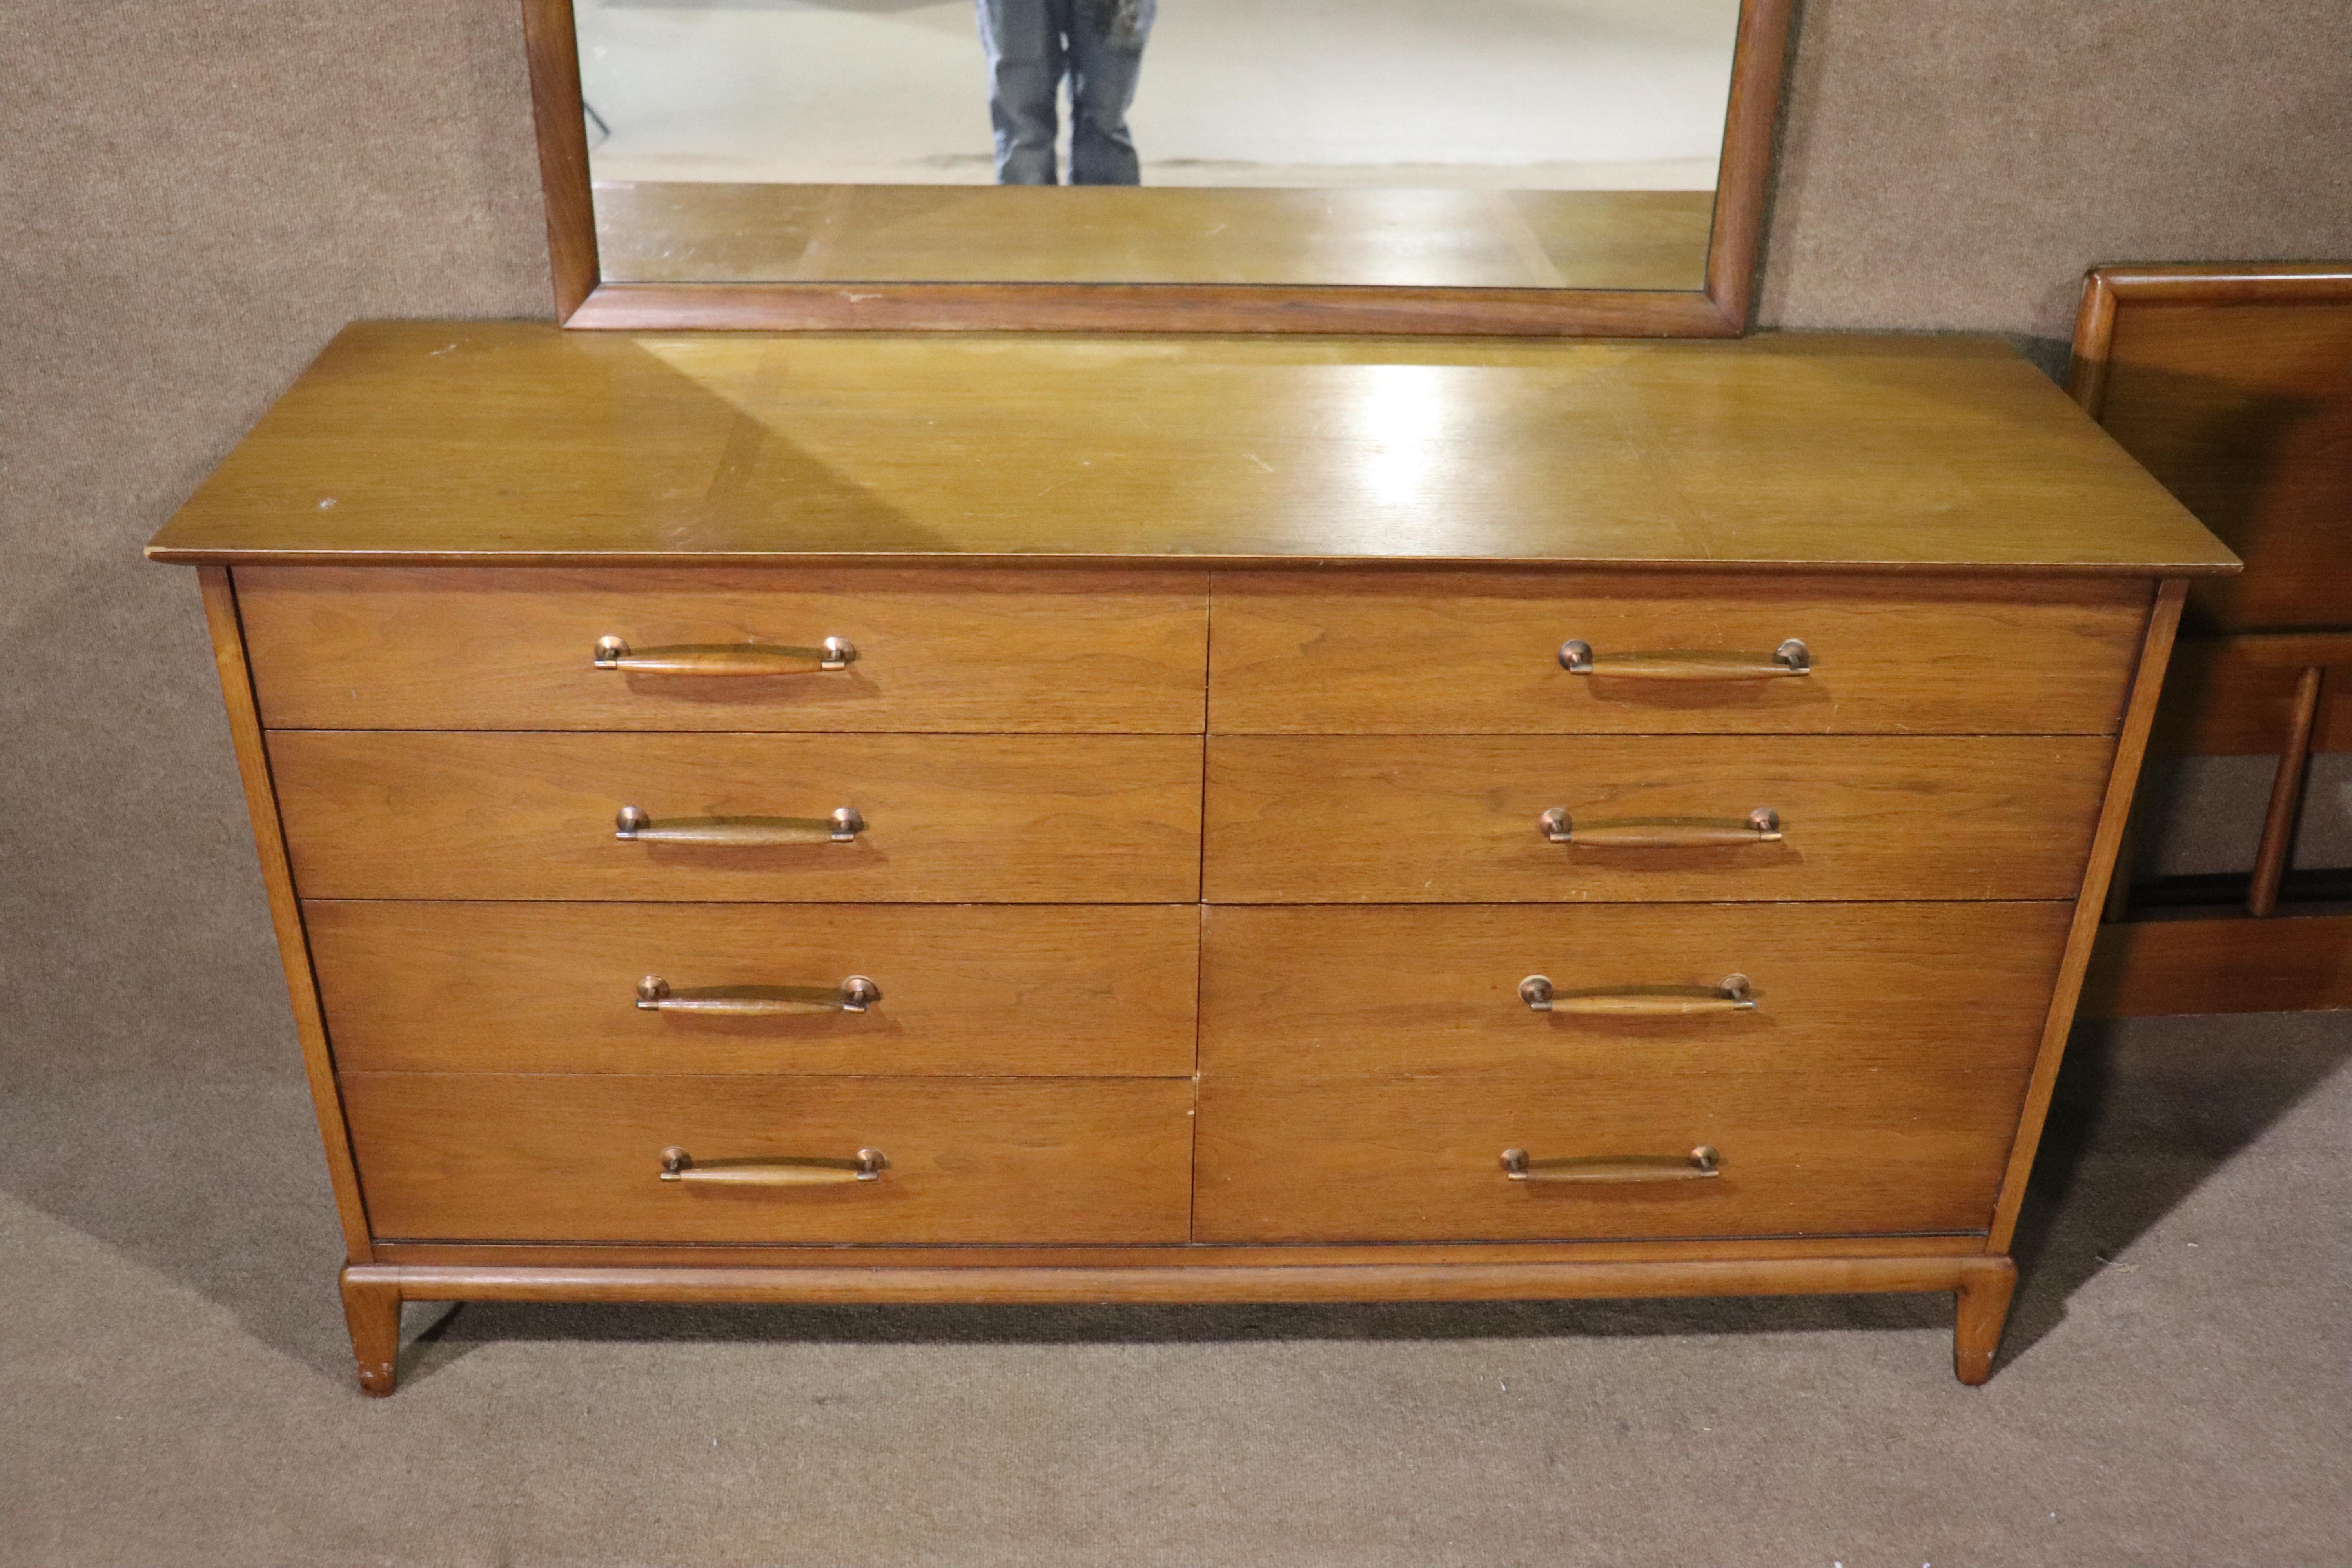 Long mid-century dresser and mirror by Henredon. Walnut wood inlay strips on top, wood sculpted handles, tapered leg base.
* Matching pieces available *
Please confirm location NY or NJ